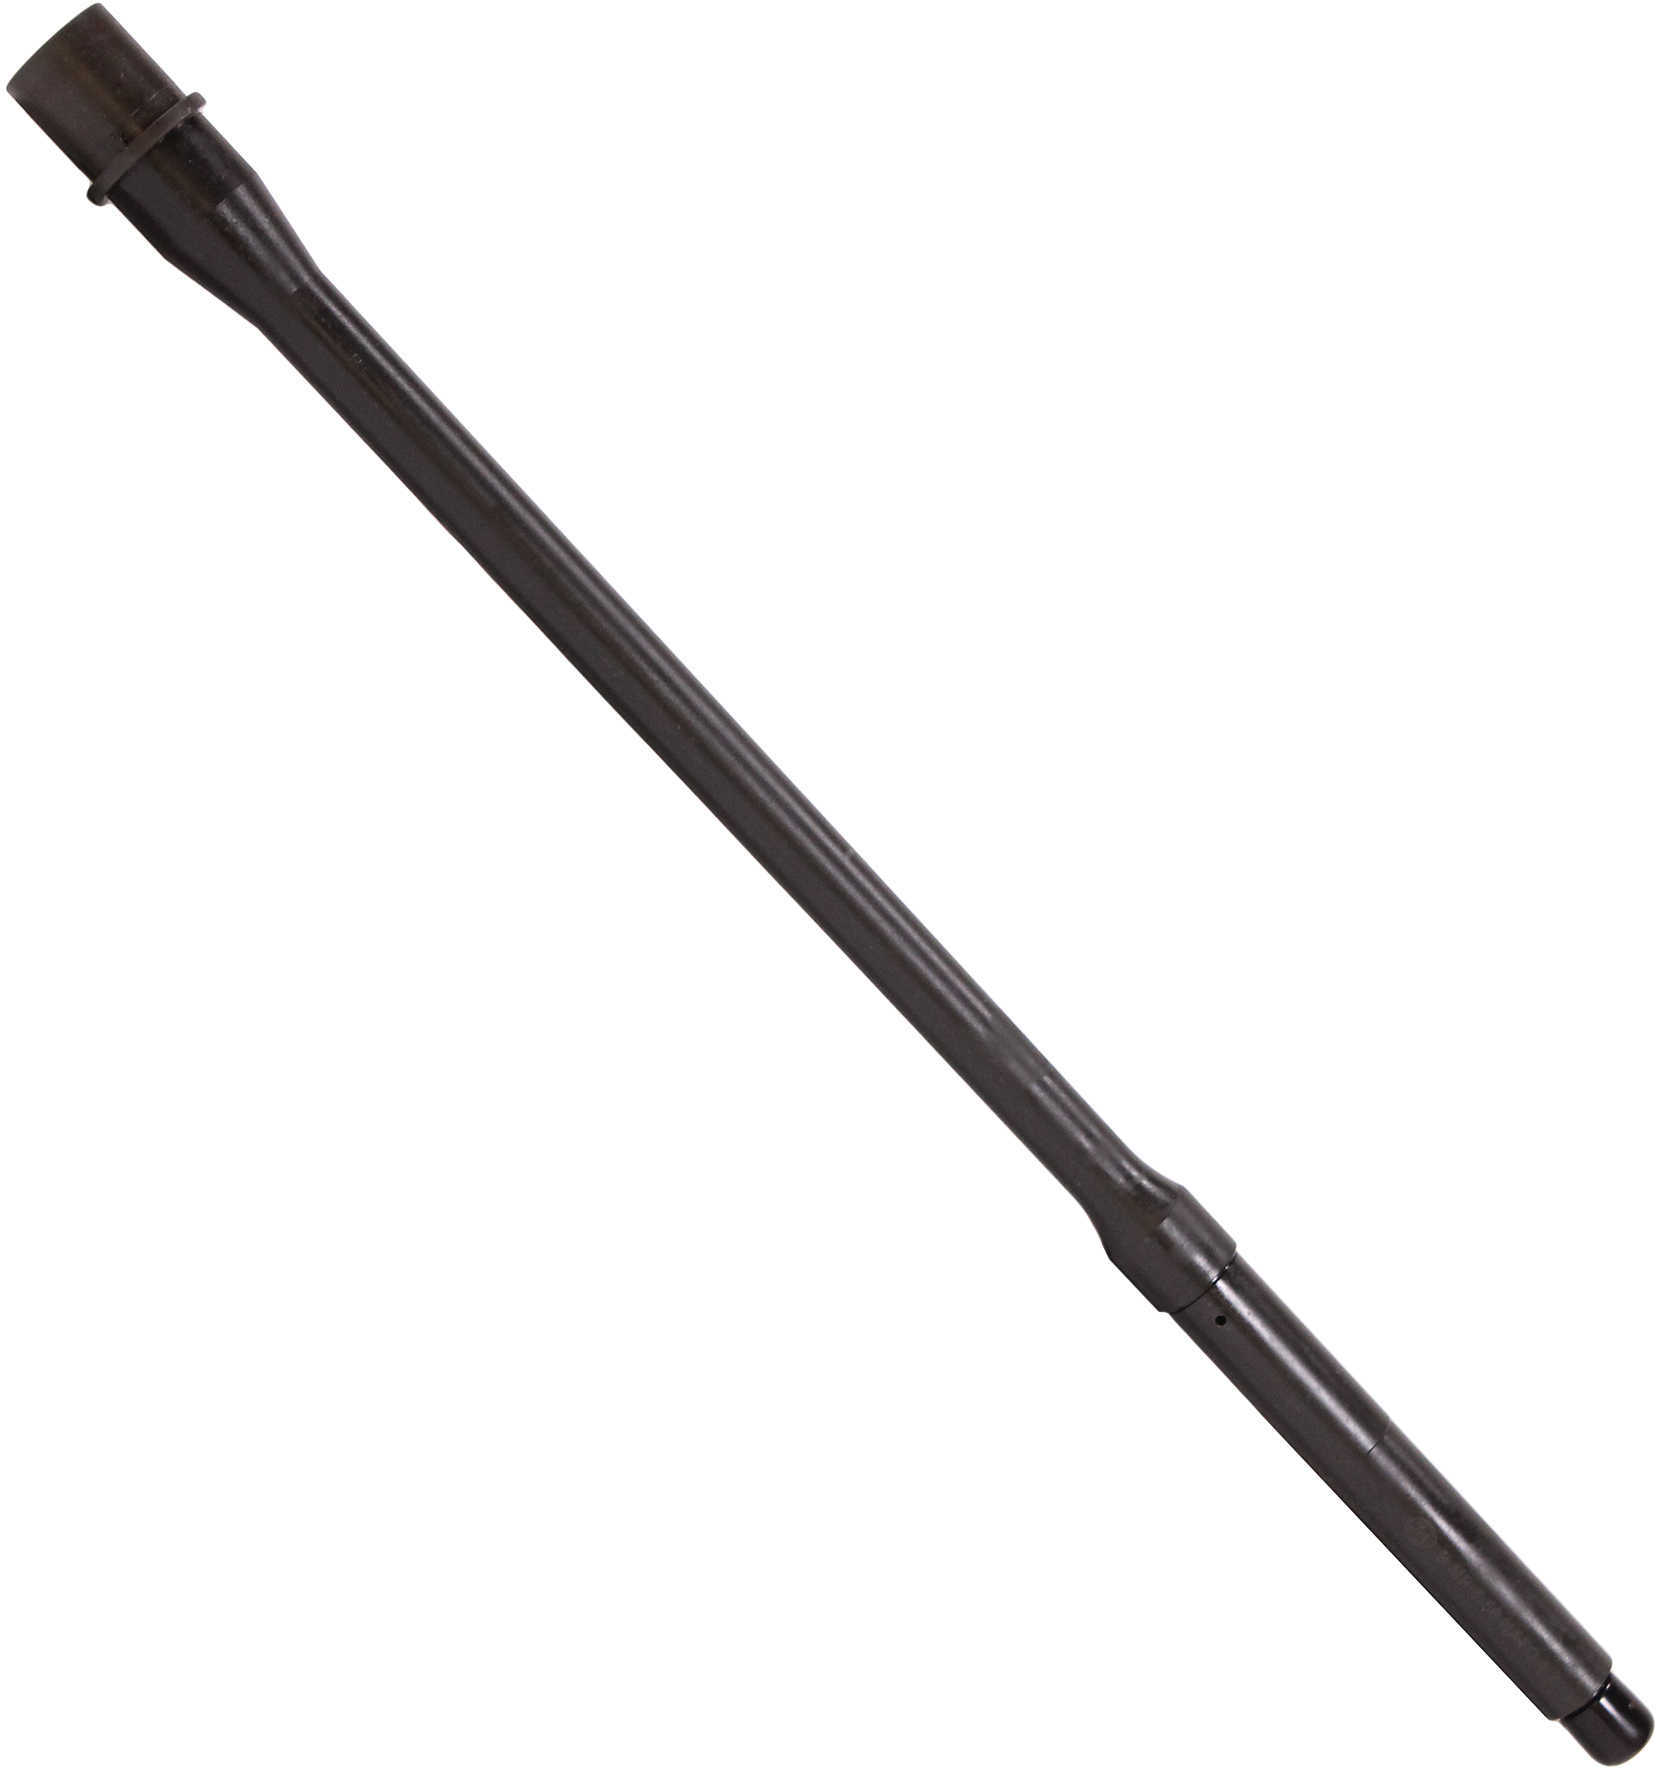 FN 20-100042 AR-15 5.56X45mm Nato 18" Button Rifled M16 Profile Length Gas System Black Phosphate Cold Hammer For